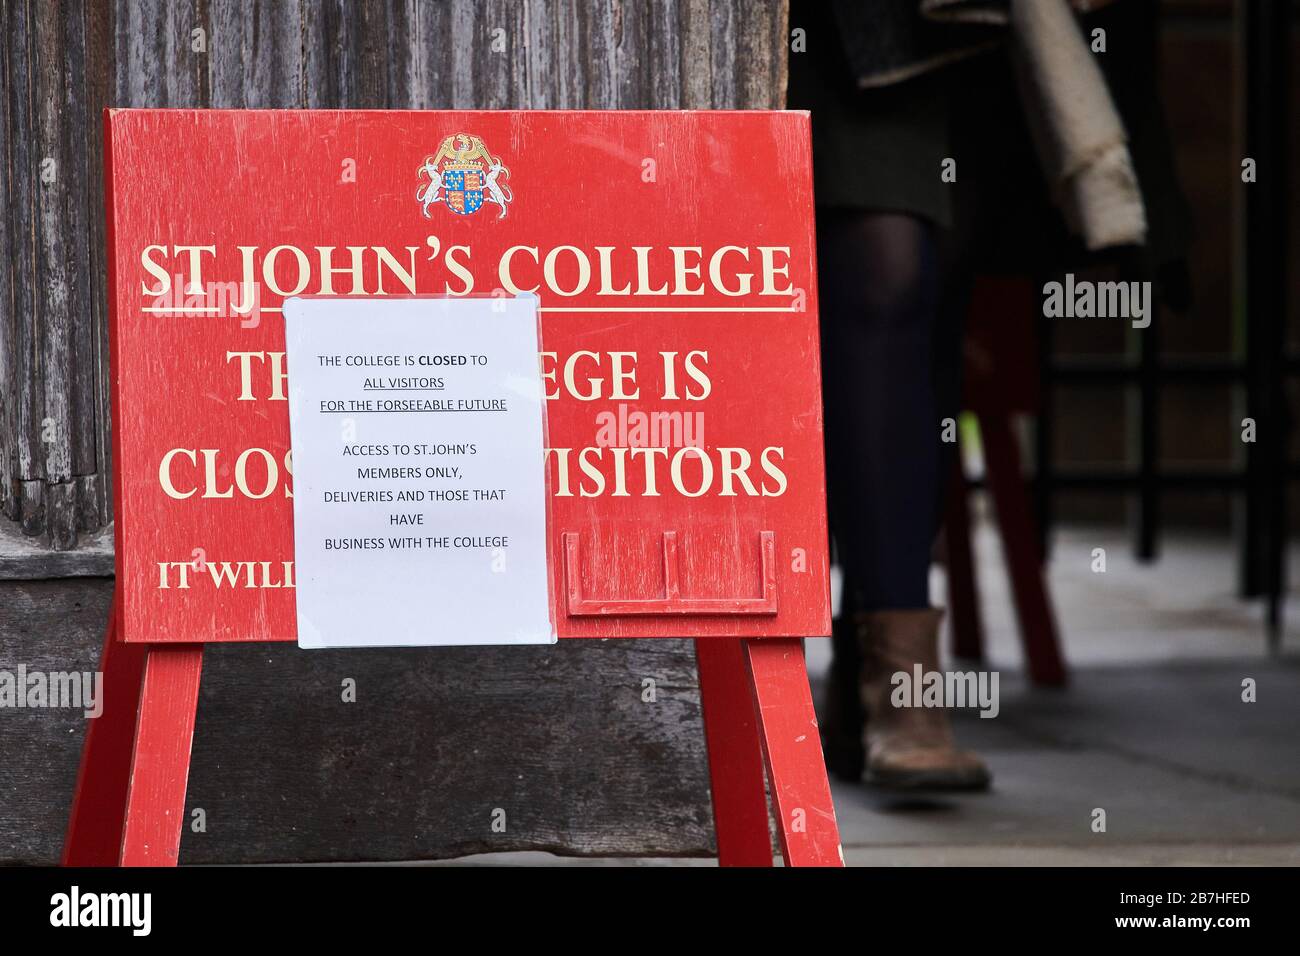 St John's college, university of Cambridge, England, closed to visitors for foreseeable future, on 16 march 2020, due to the coronavirus (covid-19) pandemic. Stock Photo